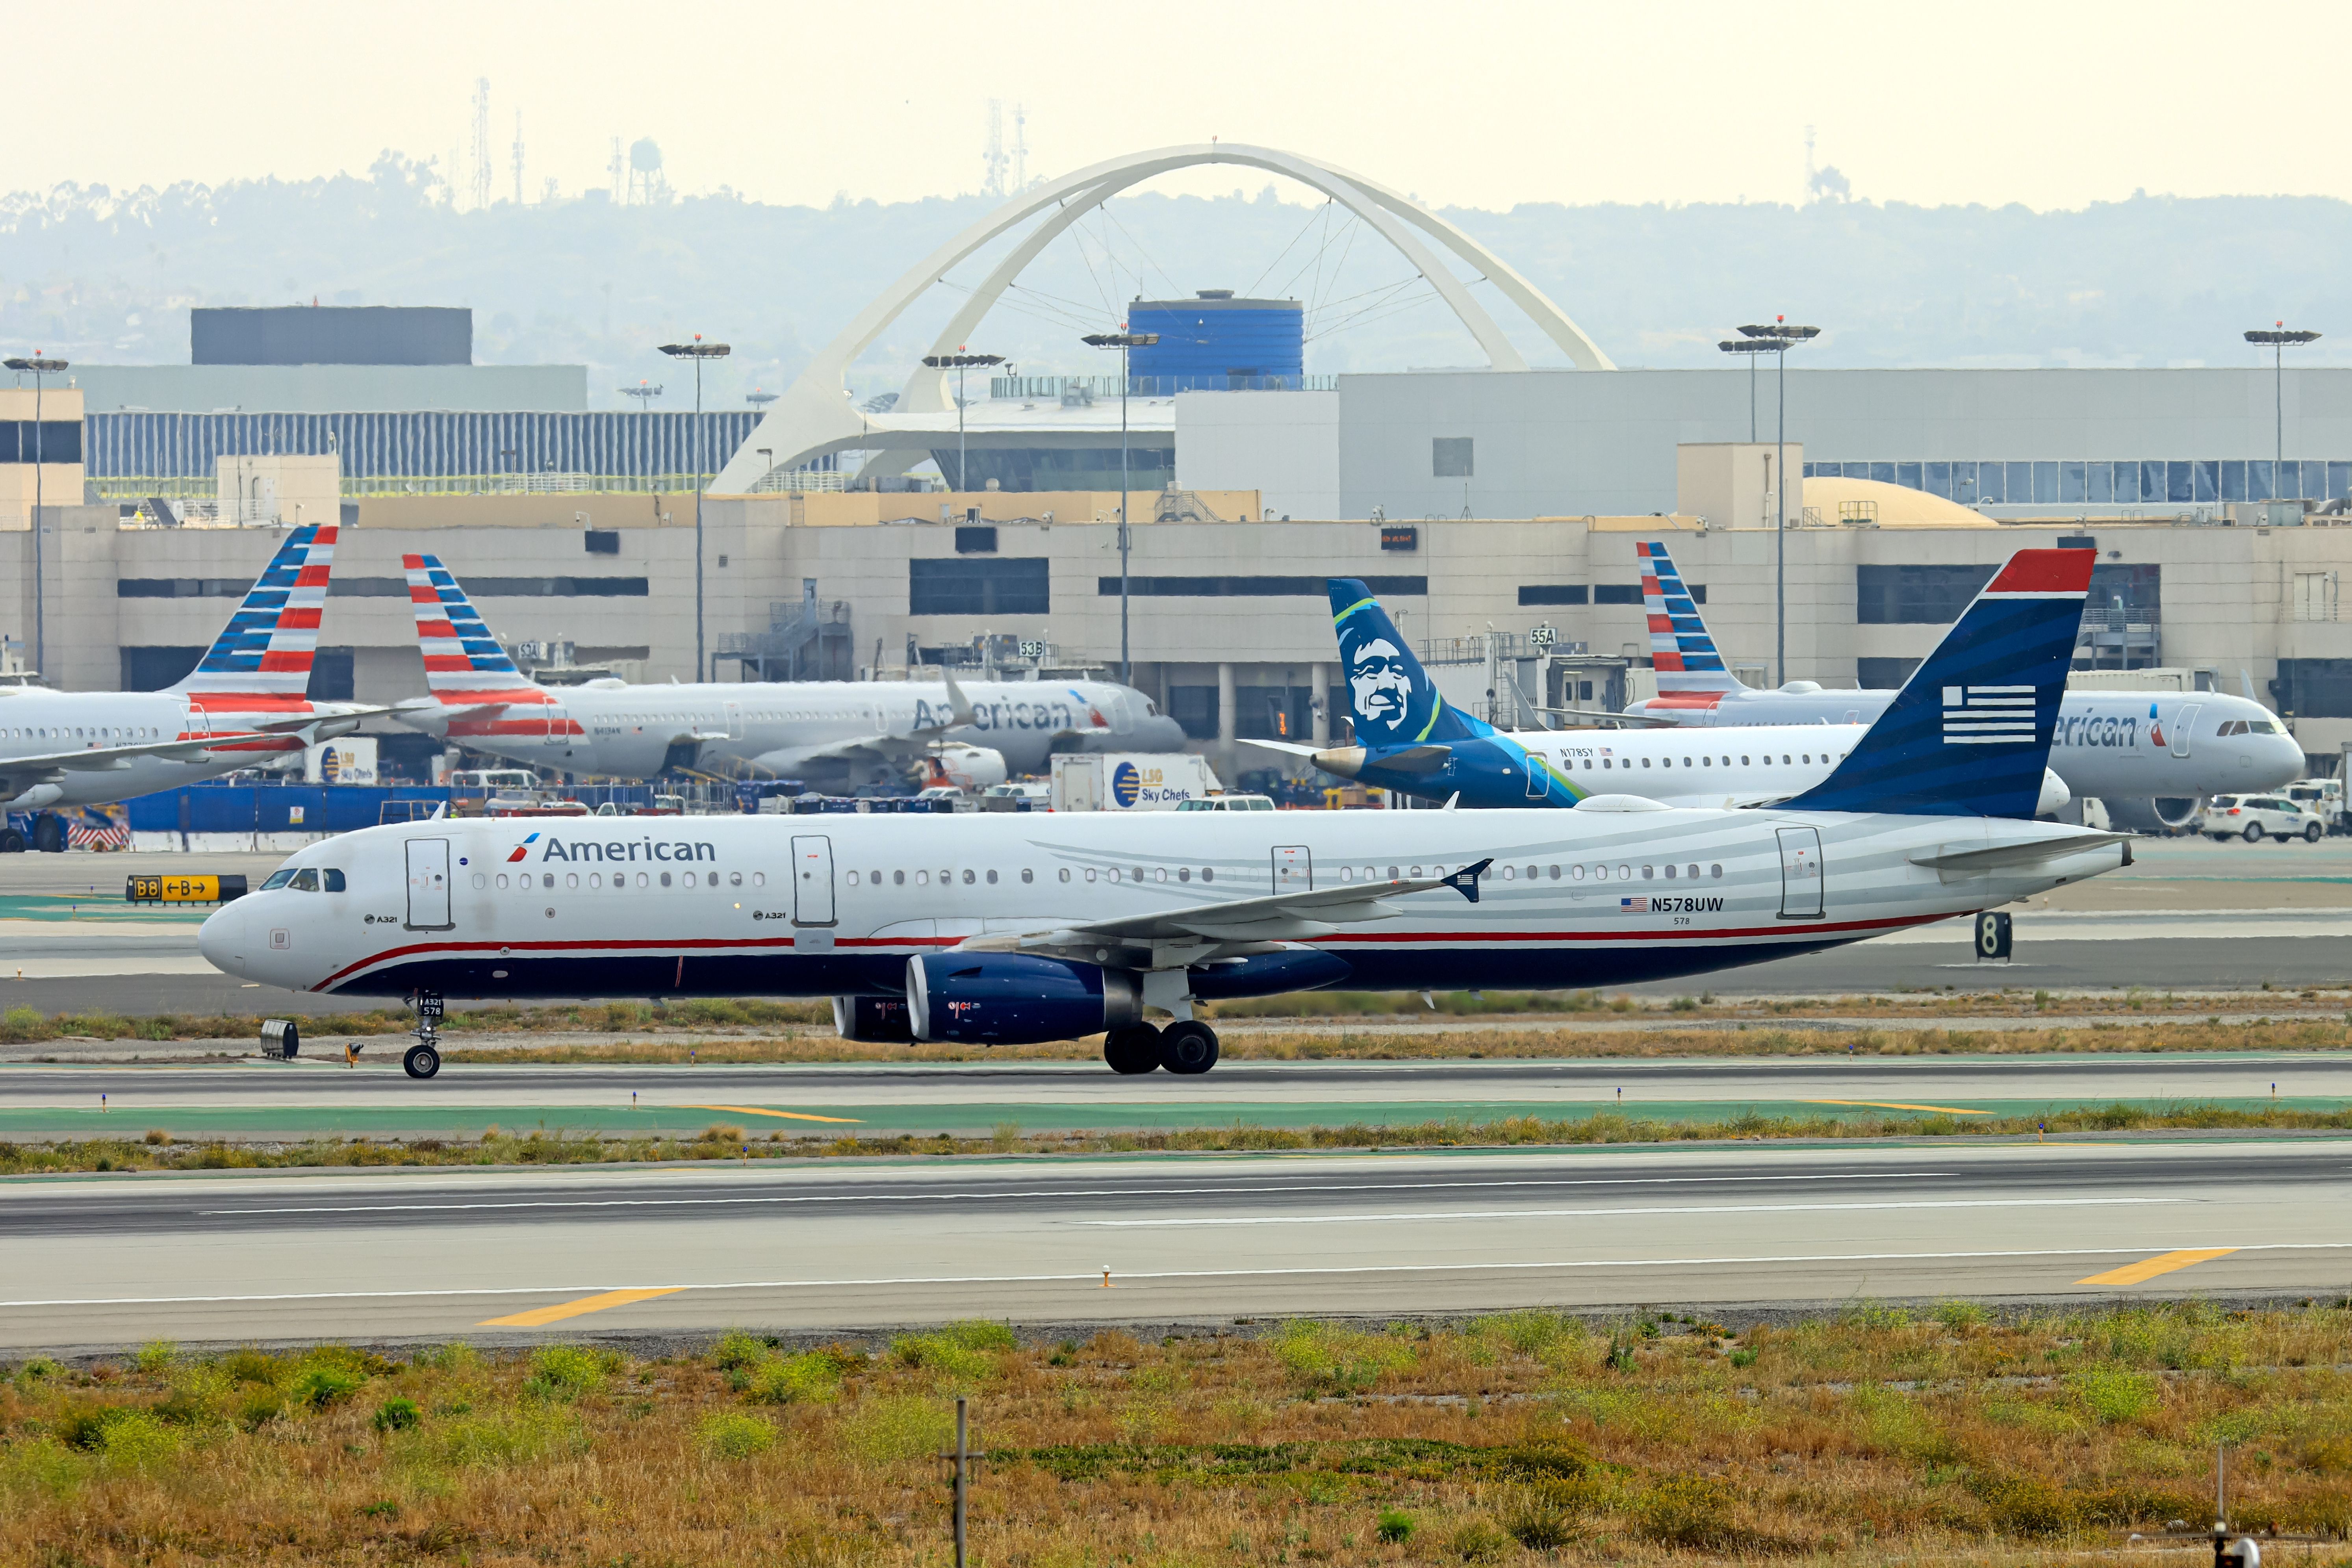 US Airways A321 with American on fuselage